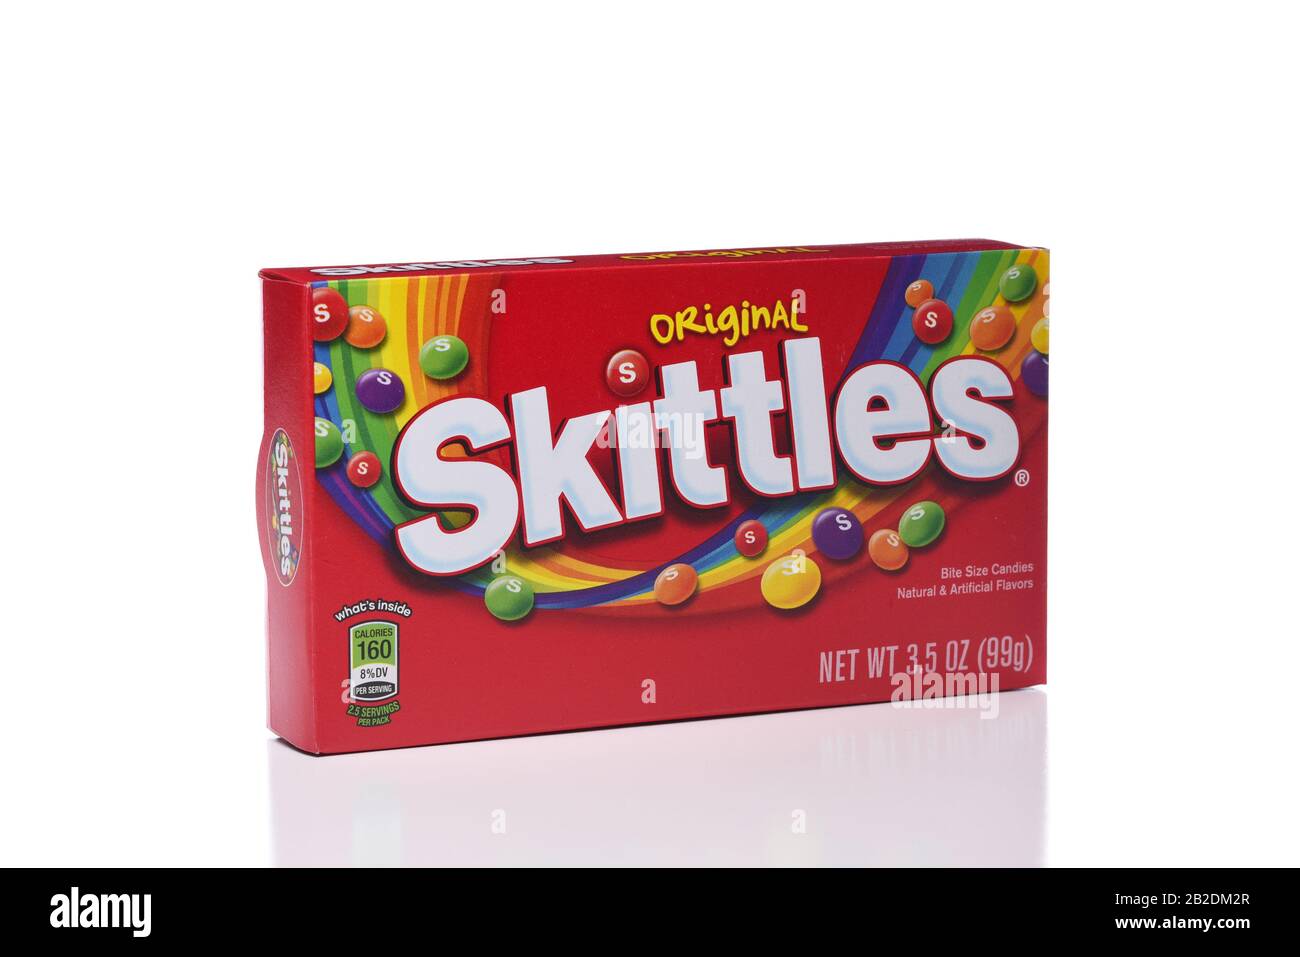 IRVINE, CALIFORNIA - JANUARY 5, 2018: Skittles Original Flavored Candies. A box of the popular fruit flavored chewy treats. Stock Photo